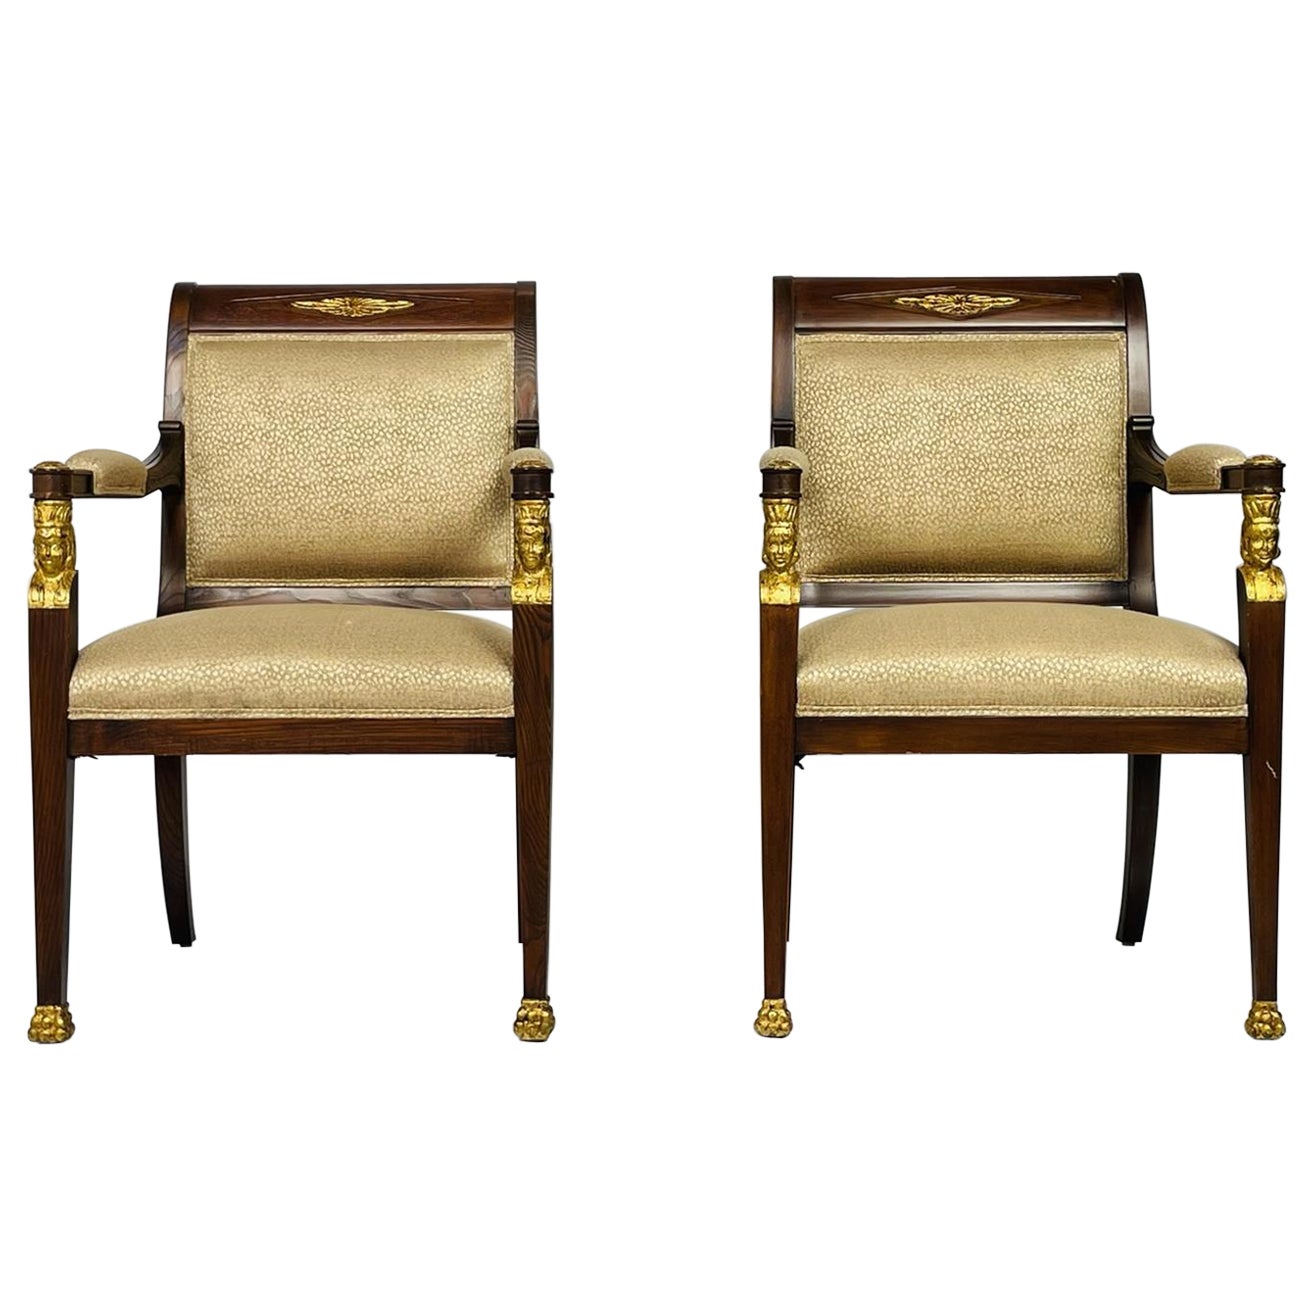 French Empire style Mahogany Armchairs Giltwood